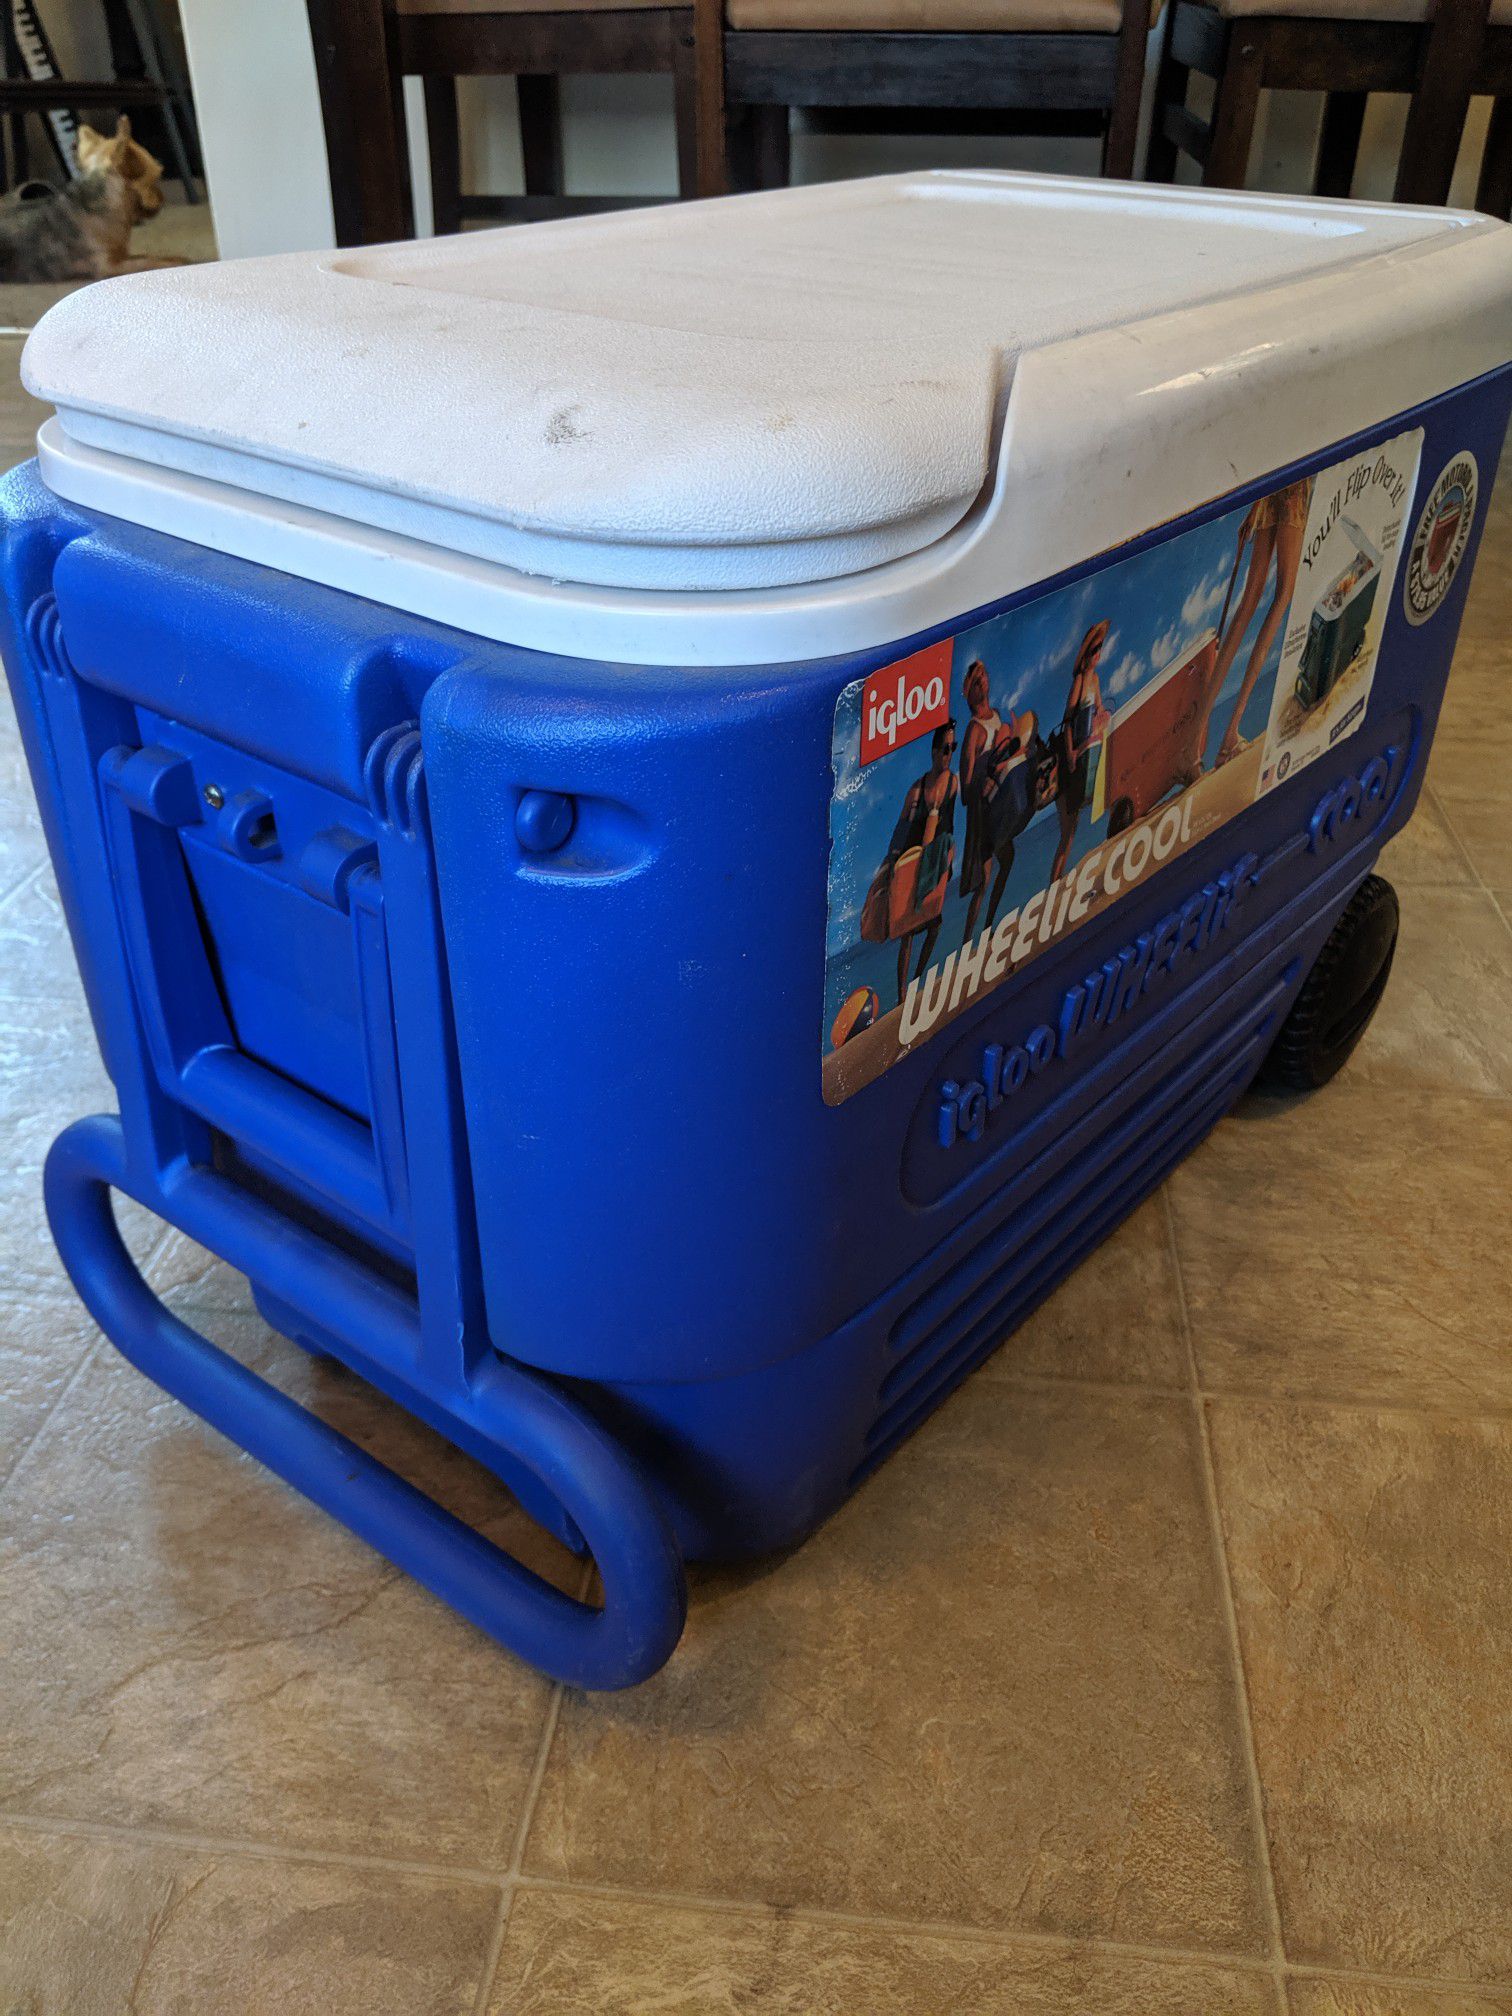 Igloo cooler large with wheels